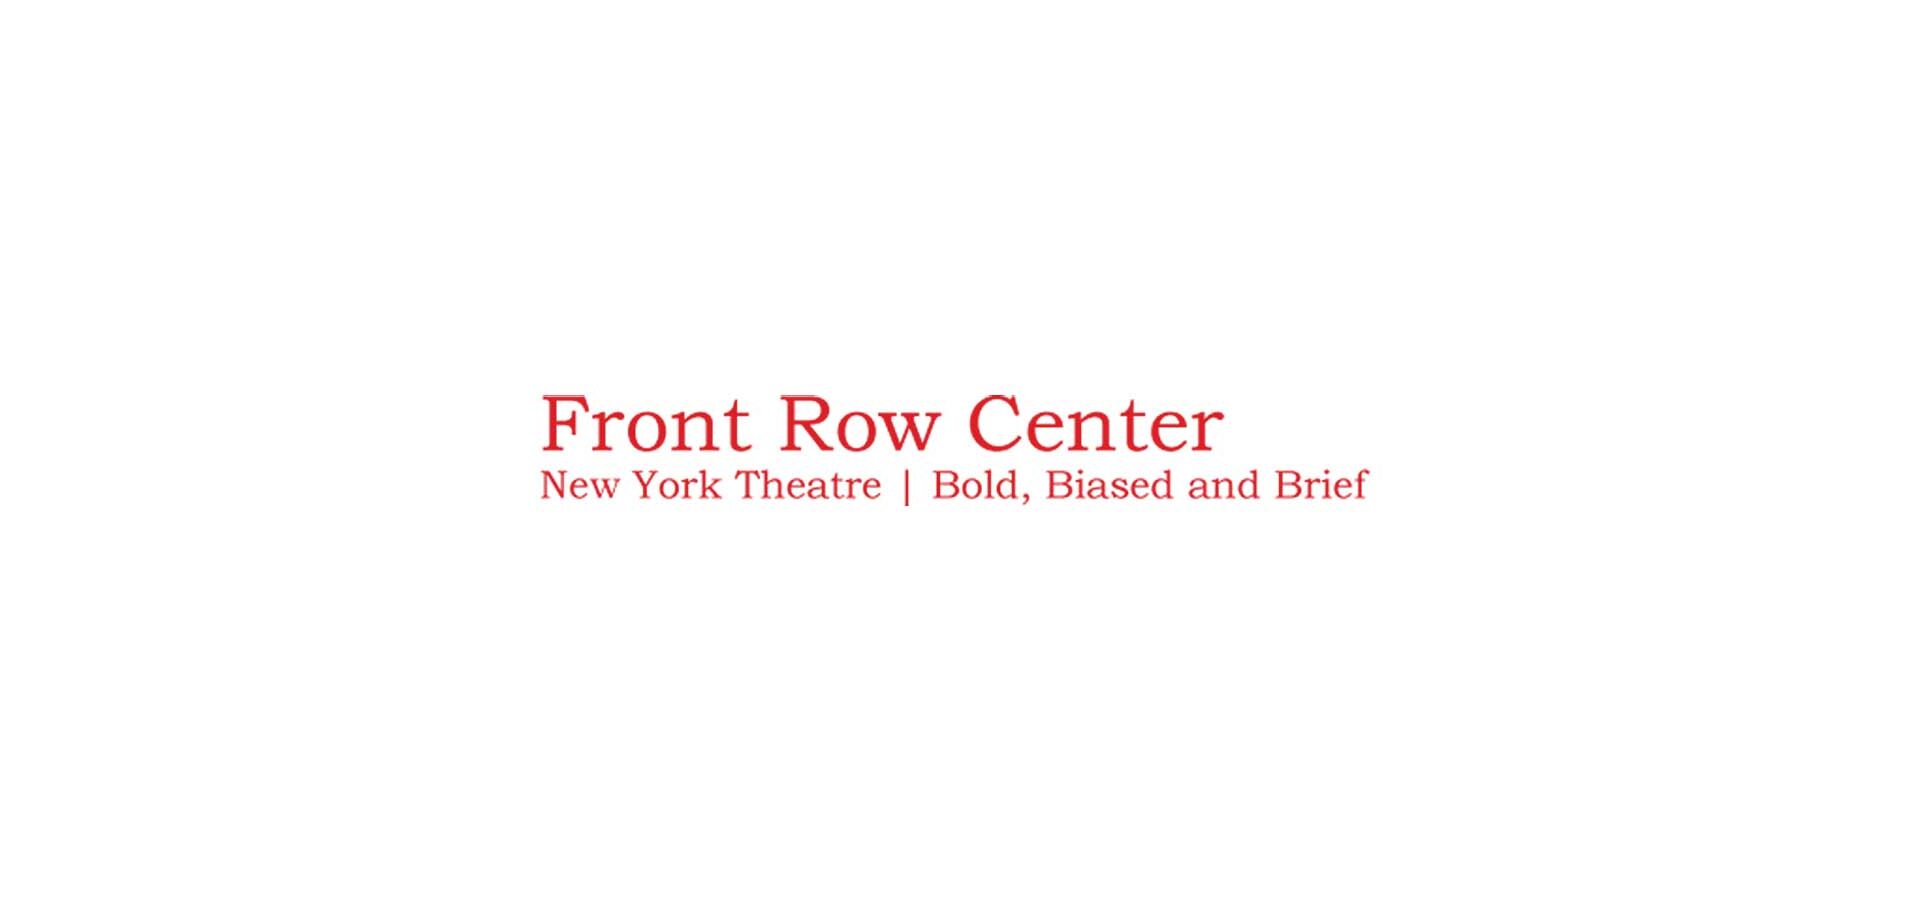 Front Row Center. New York Theater | Bold, Biased and Brief